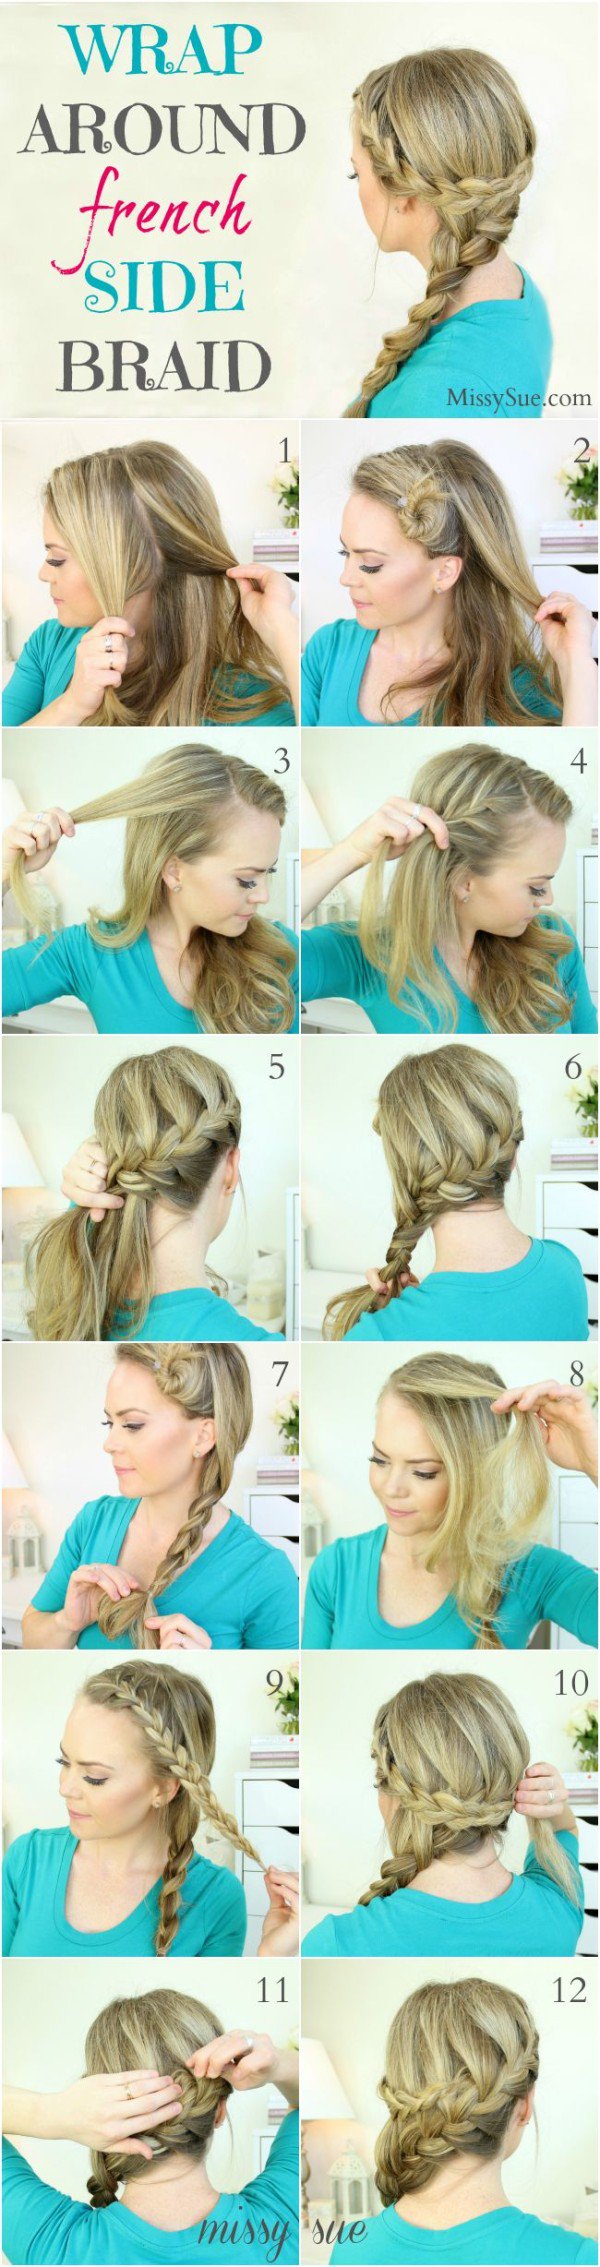 14 Fast But Super Cool Hairstyle Ideas For Busy Mornings